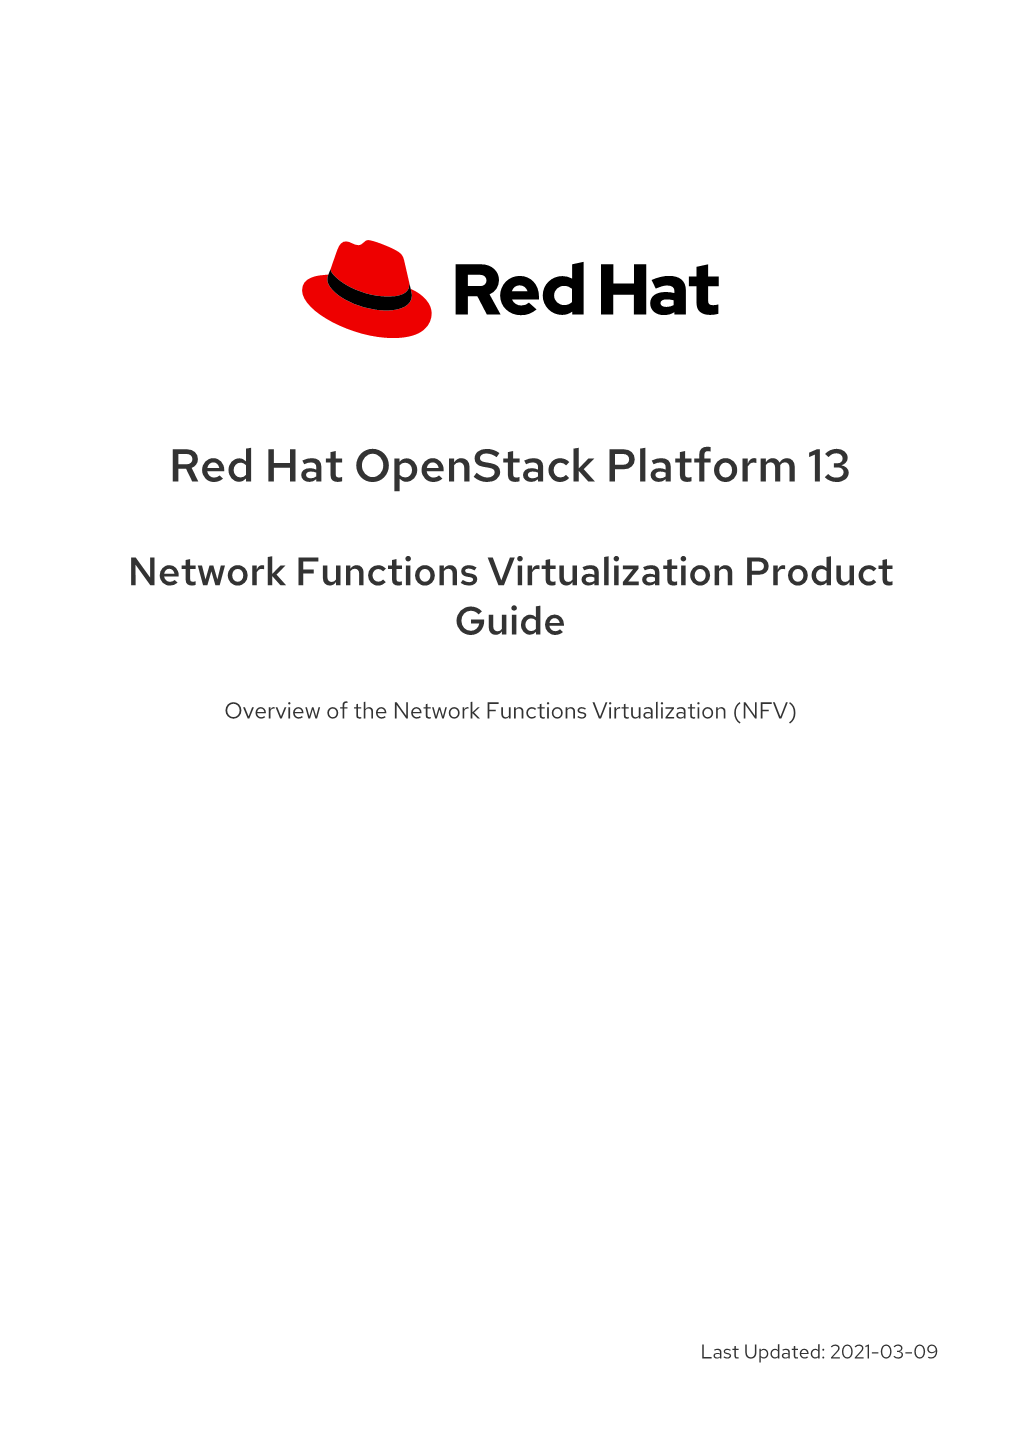 Red Hat Openstack Platform 13 Network Functions Virtualization Product Guide